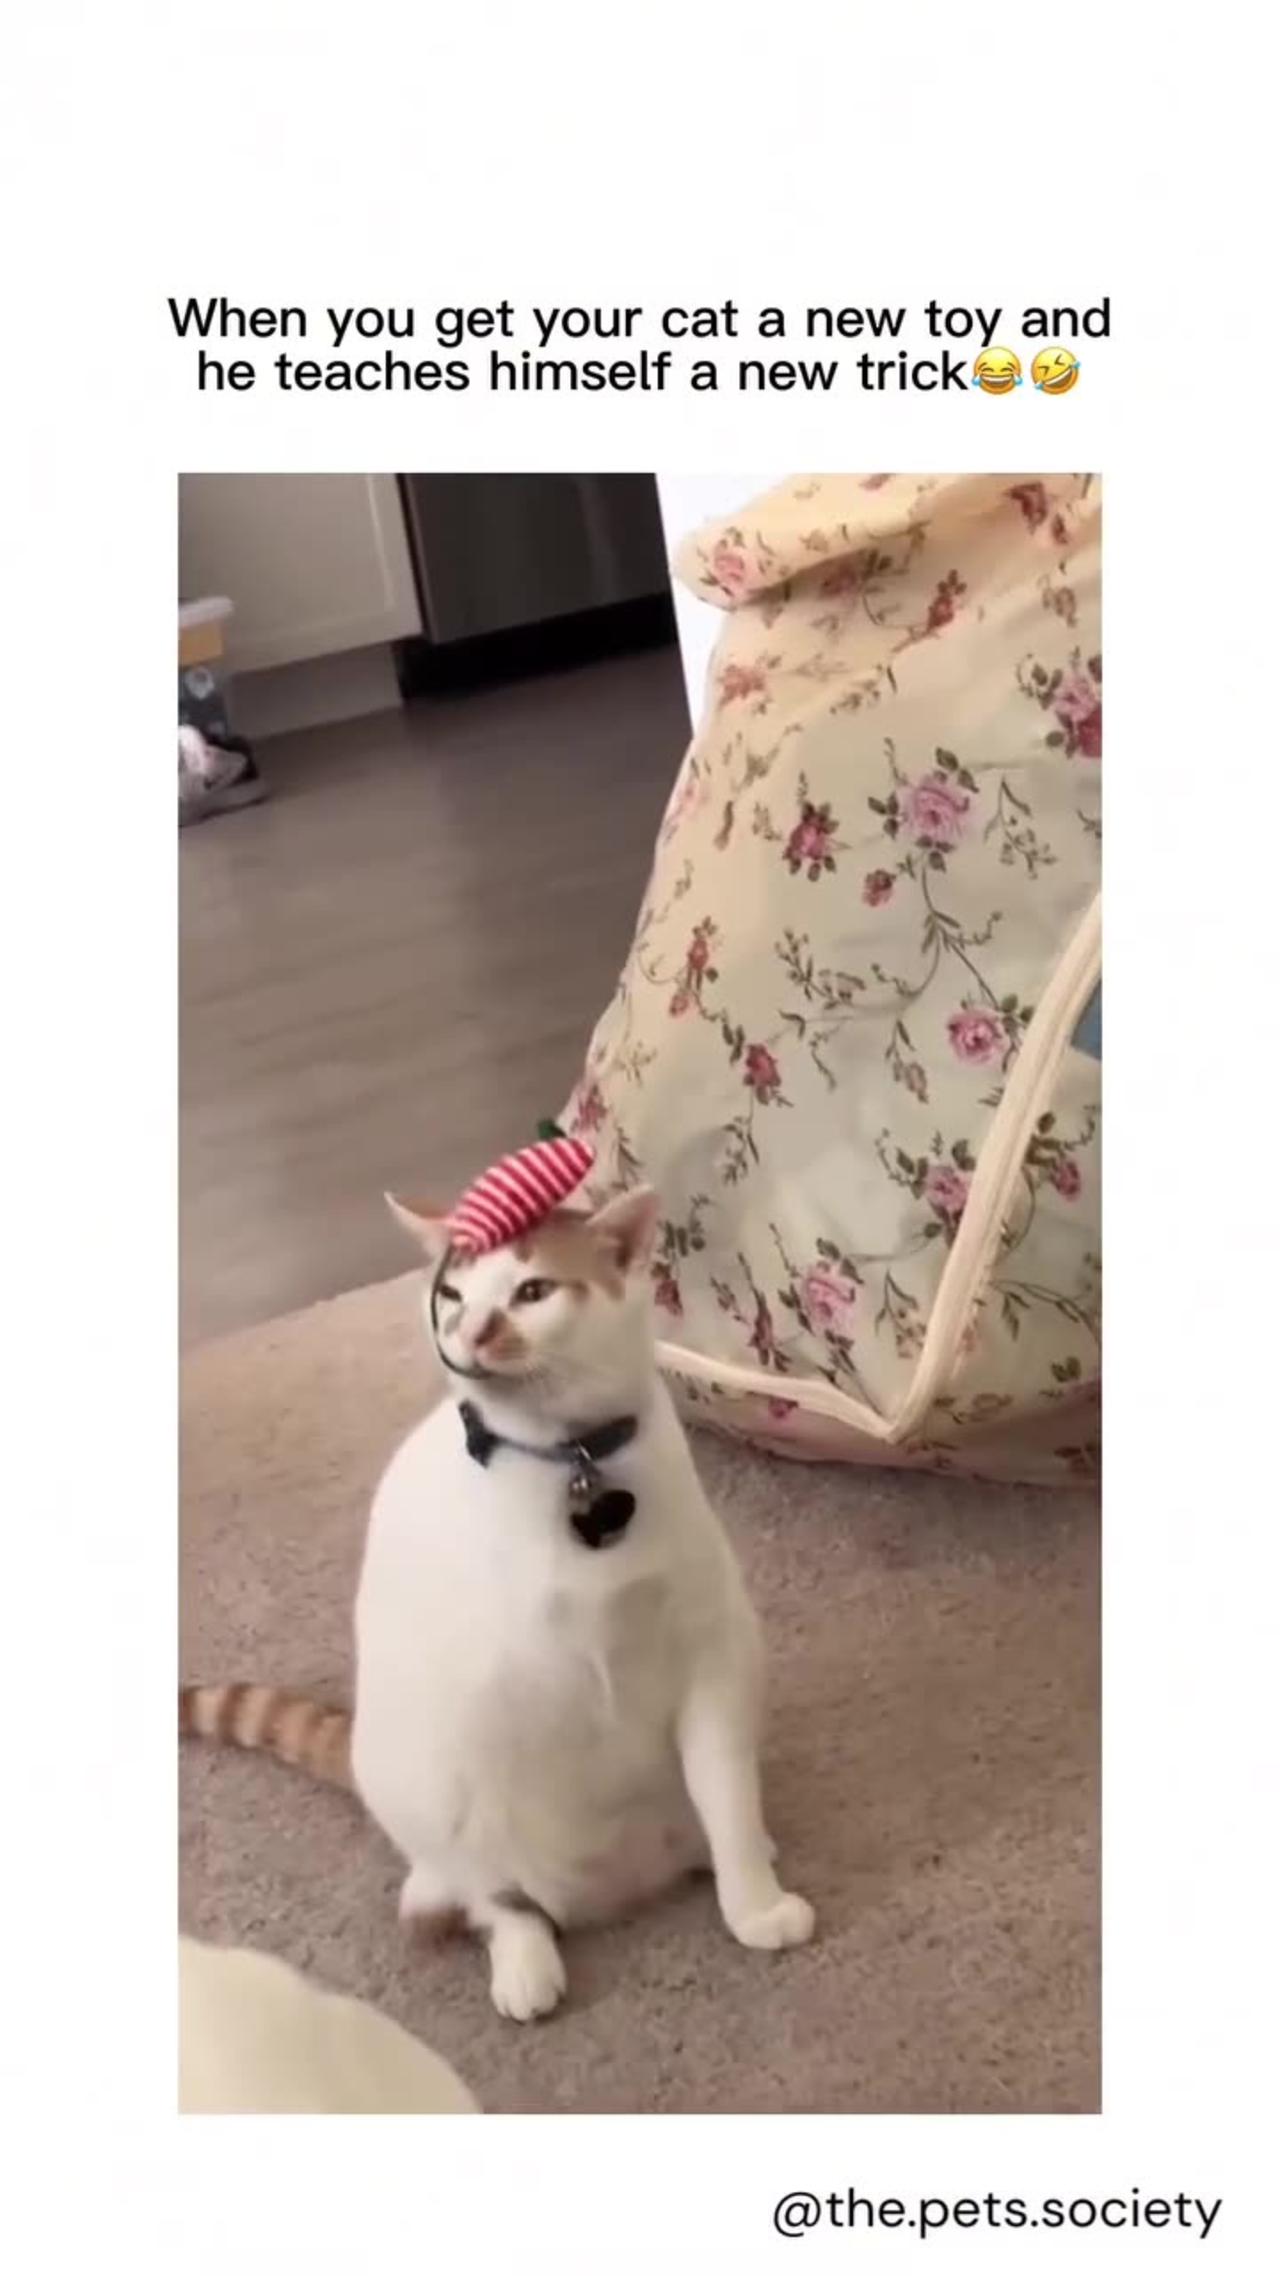 When you get your cat a new toy and he teaches himself a new trick😂